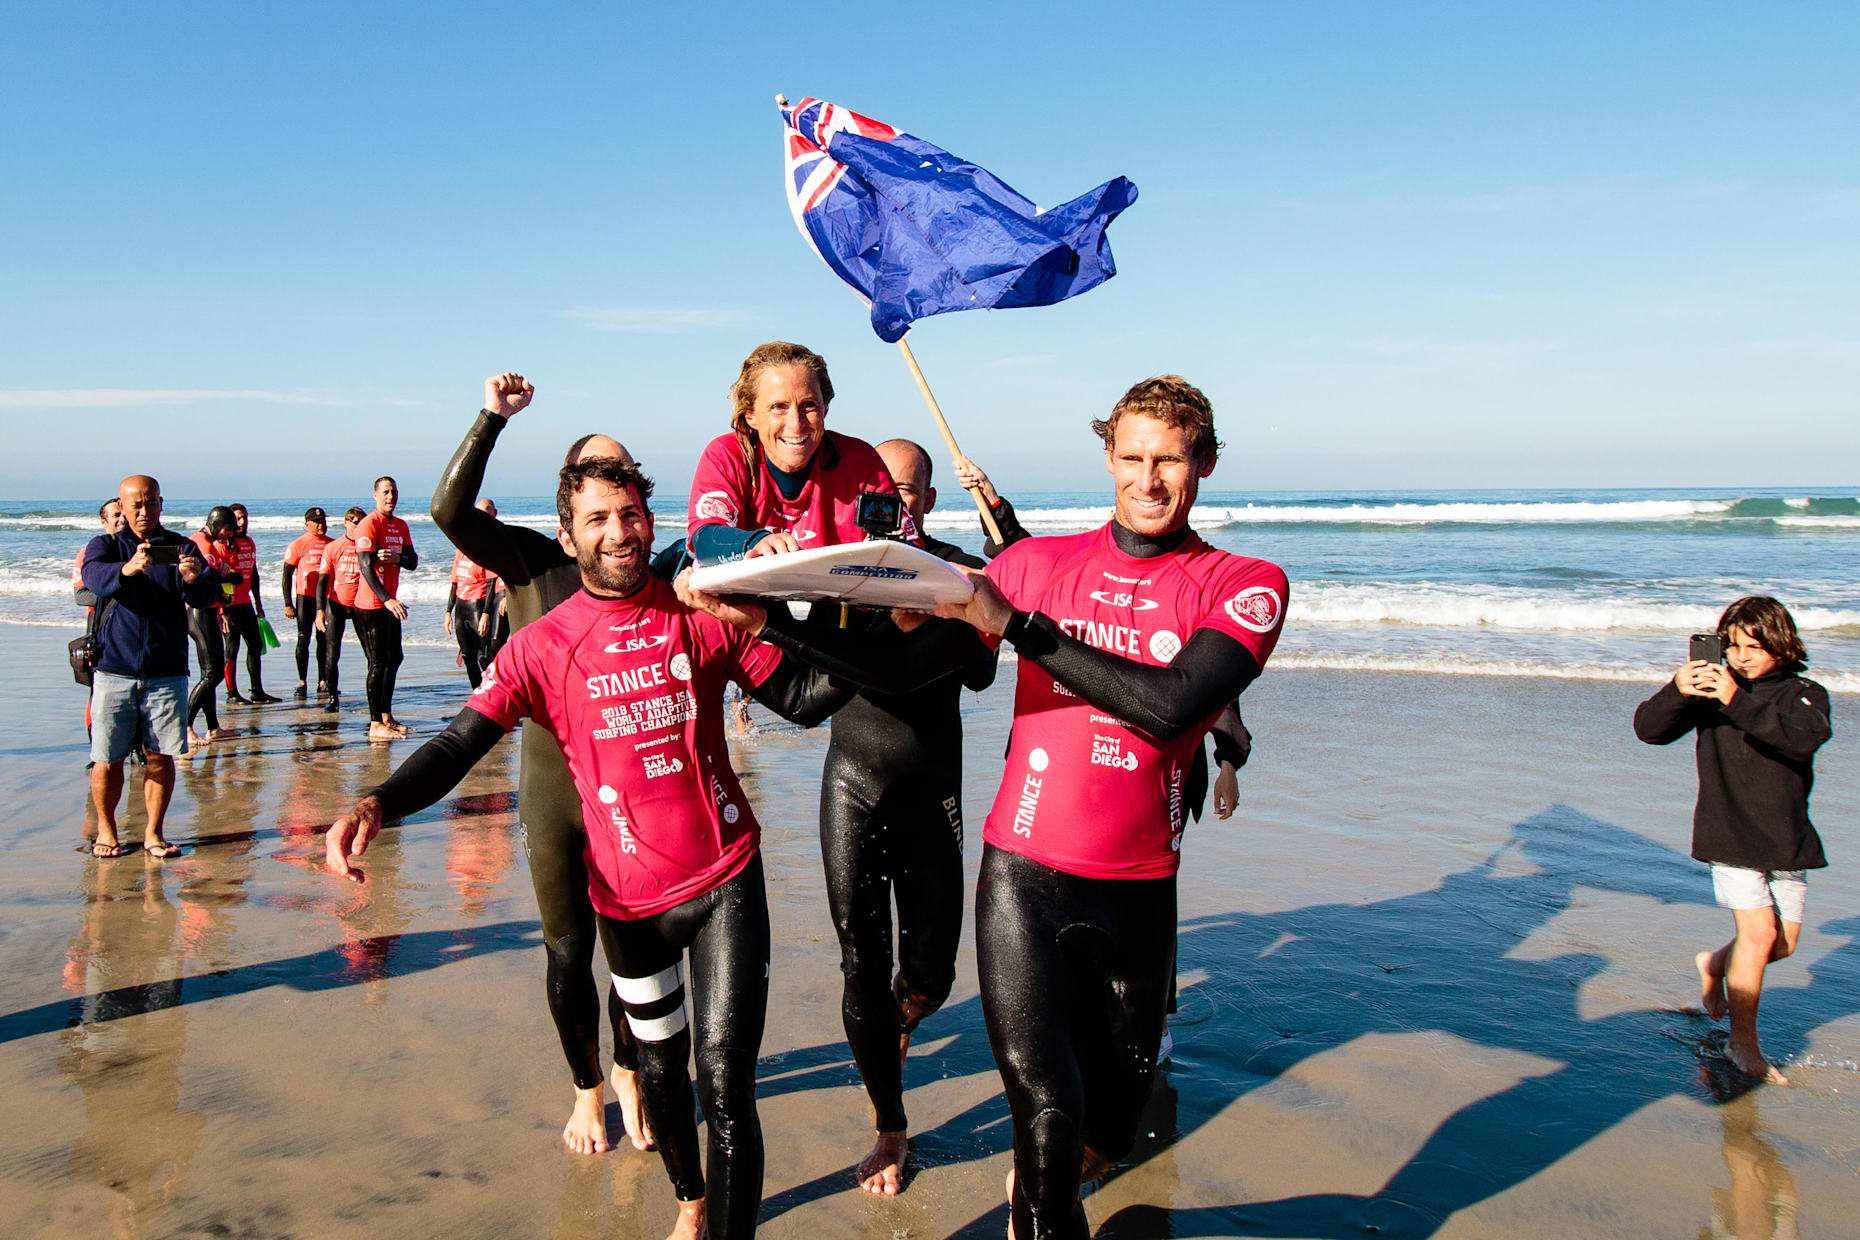 Australia's Sam Bloom pictured celebrating after winning the 2018 Para Surfing World Championships in California, USA.